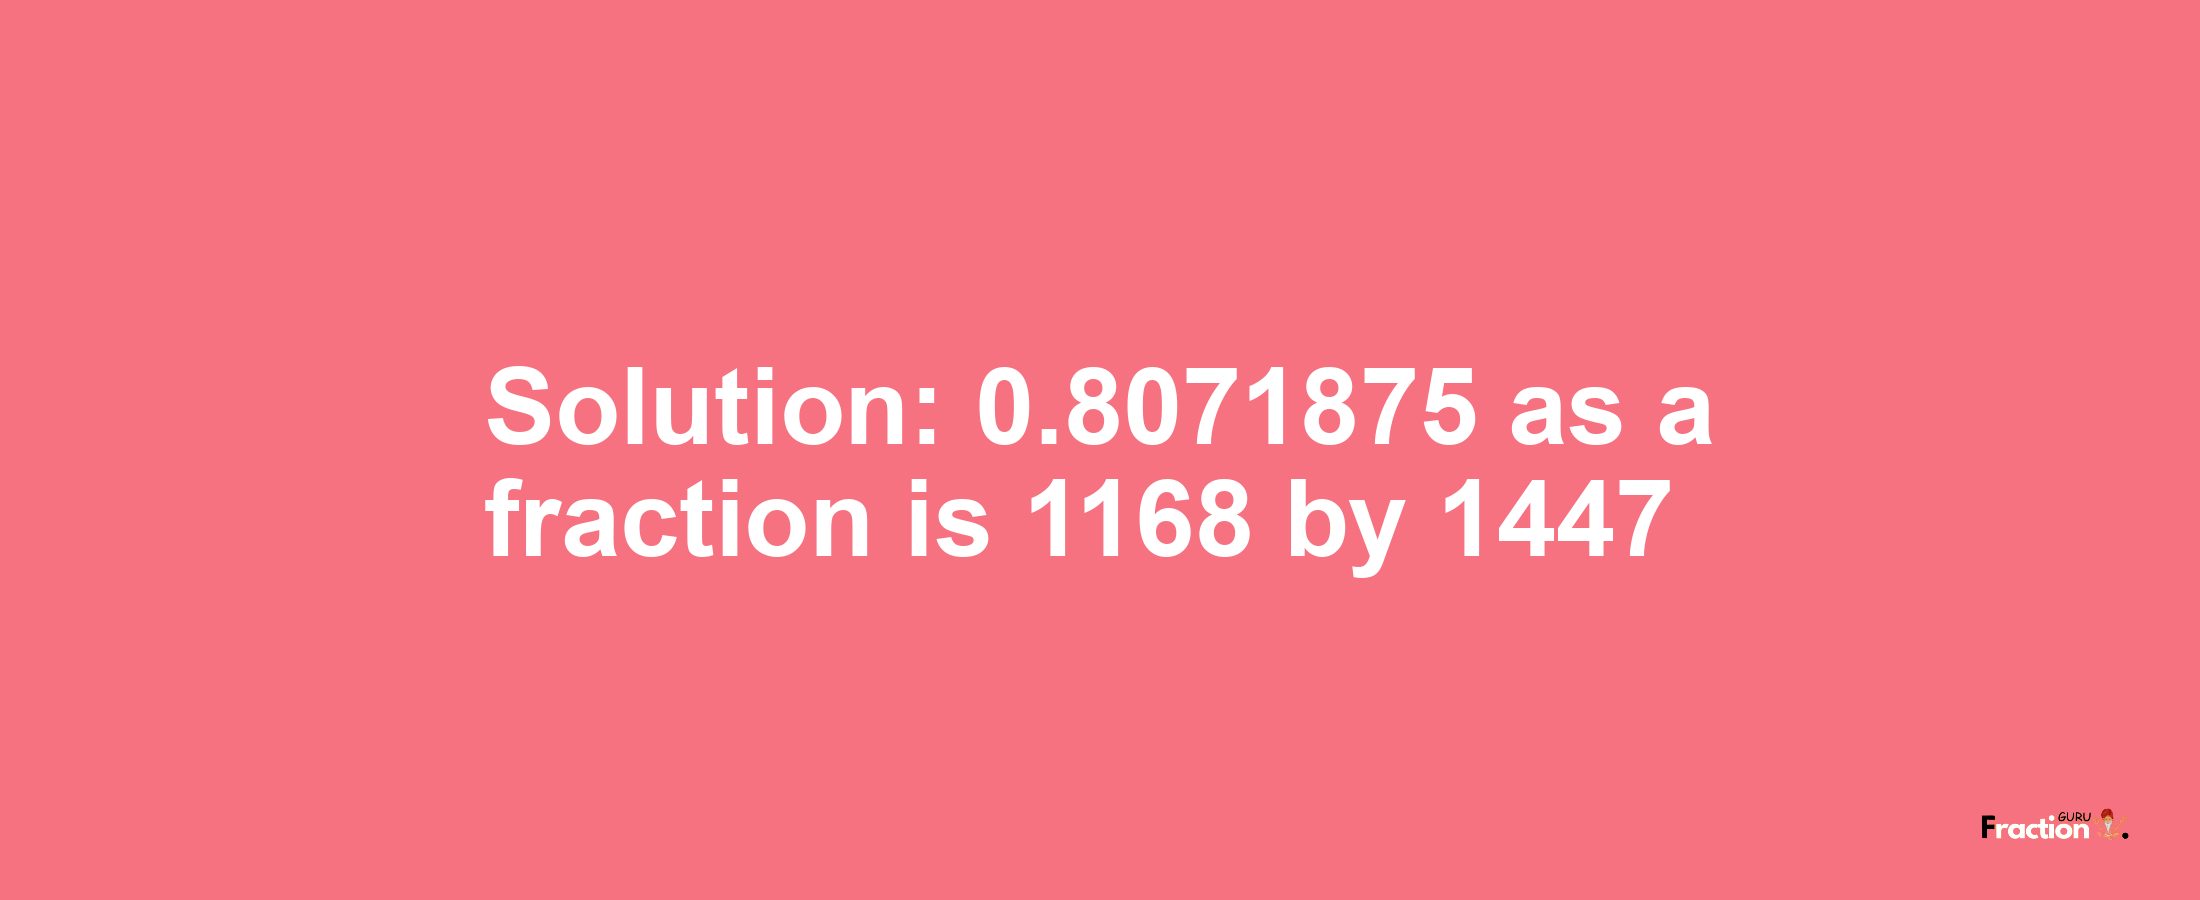 Solution:0.8071875 as a fraction is 1168/1447